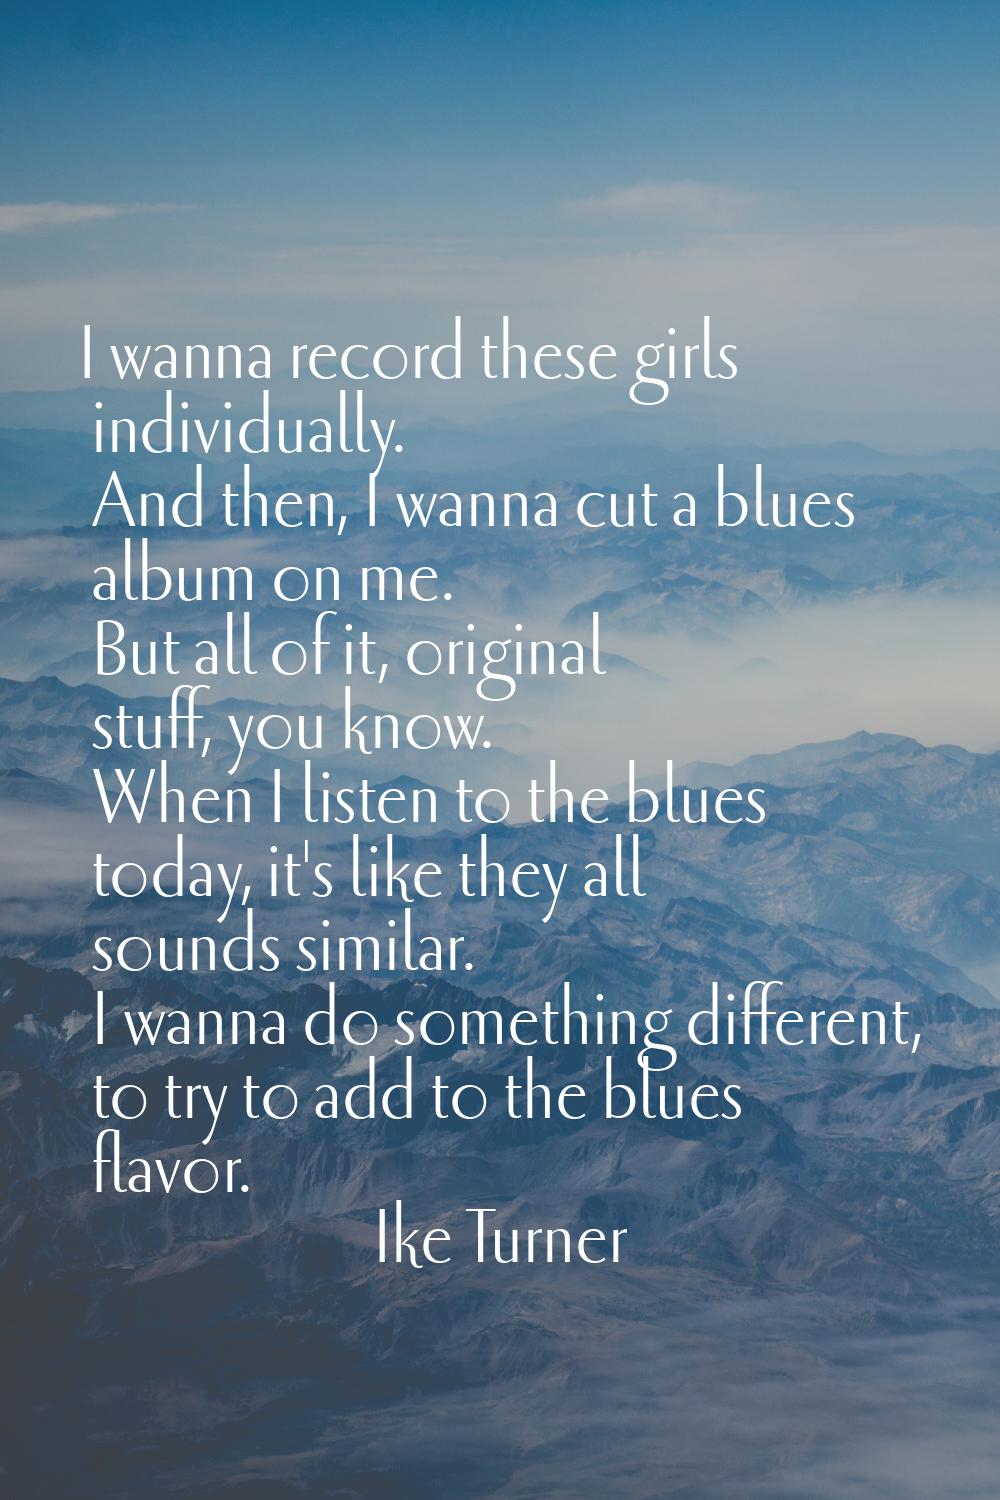 I wanna record these girls individually. And then, I wanna cut a blues album on me. But all of it, 